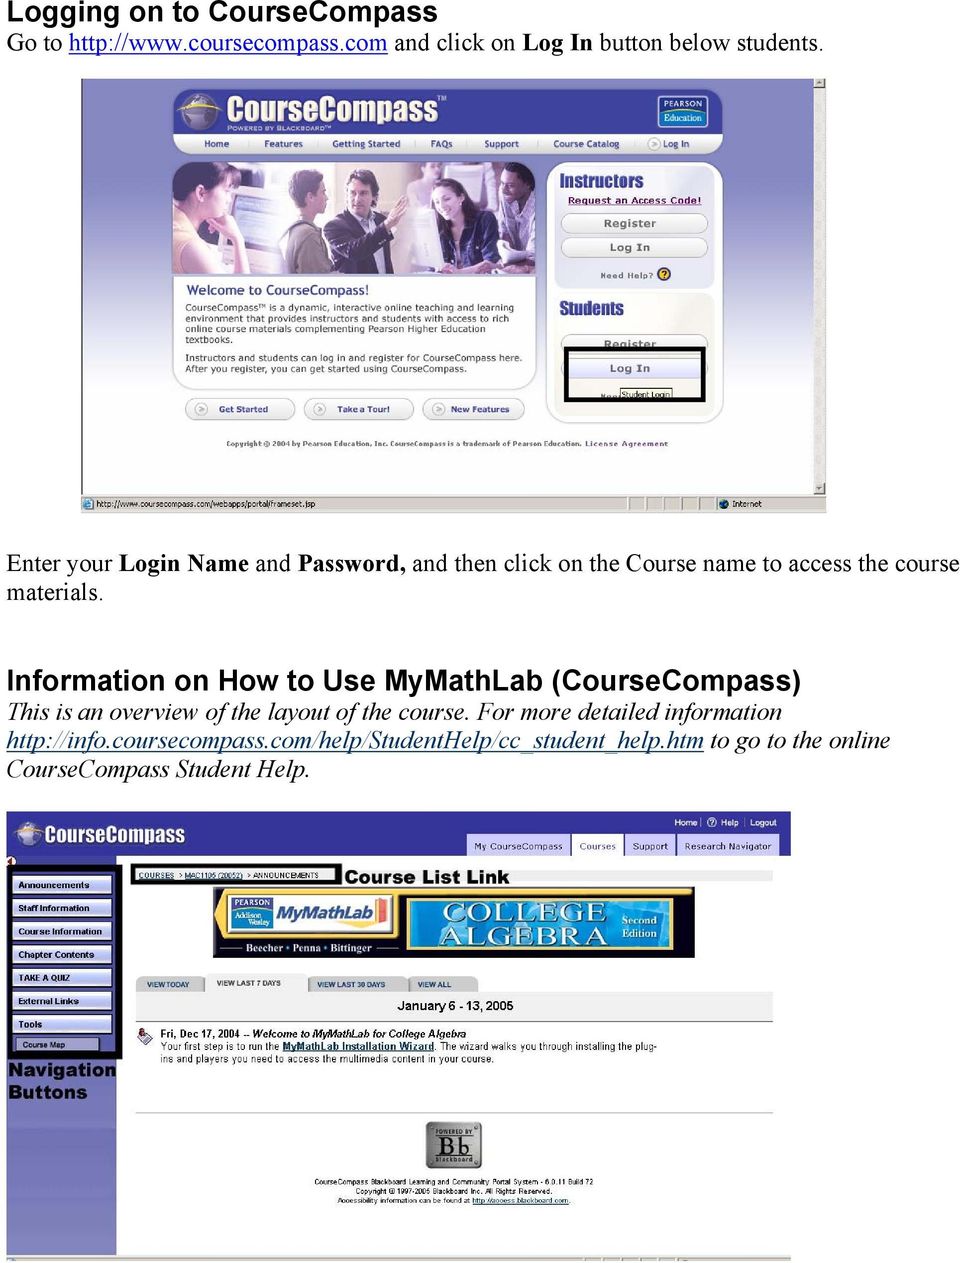 Information on How to Use MyMathLab (CourseCompass) This is an overview of the layout of the course.